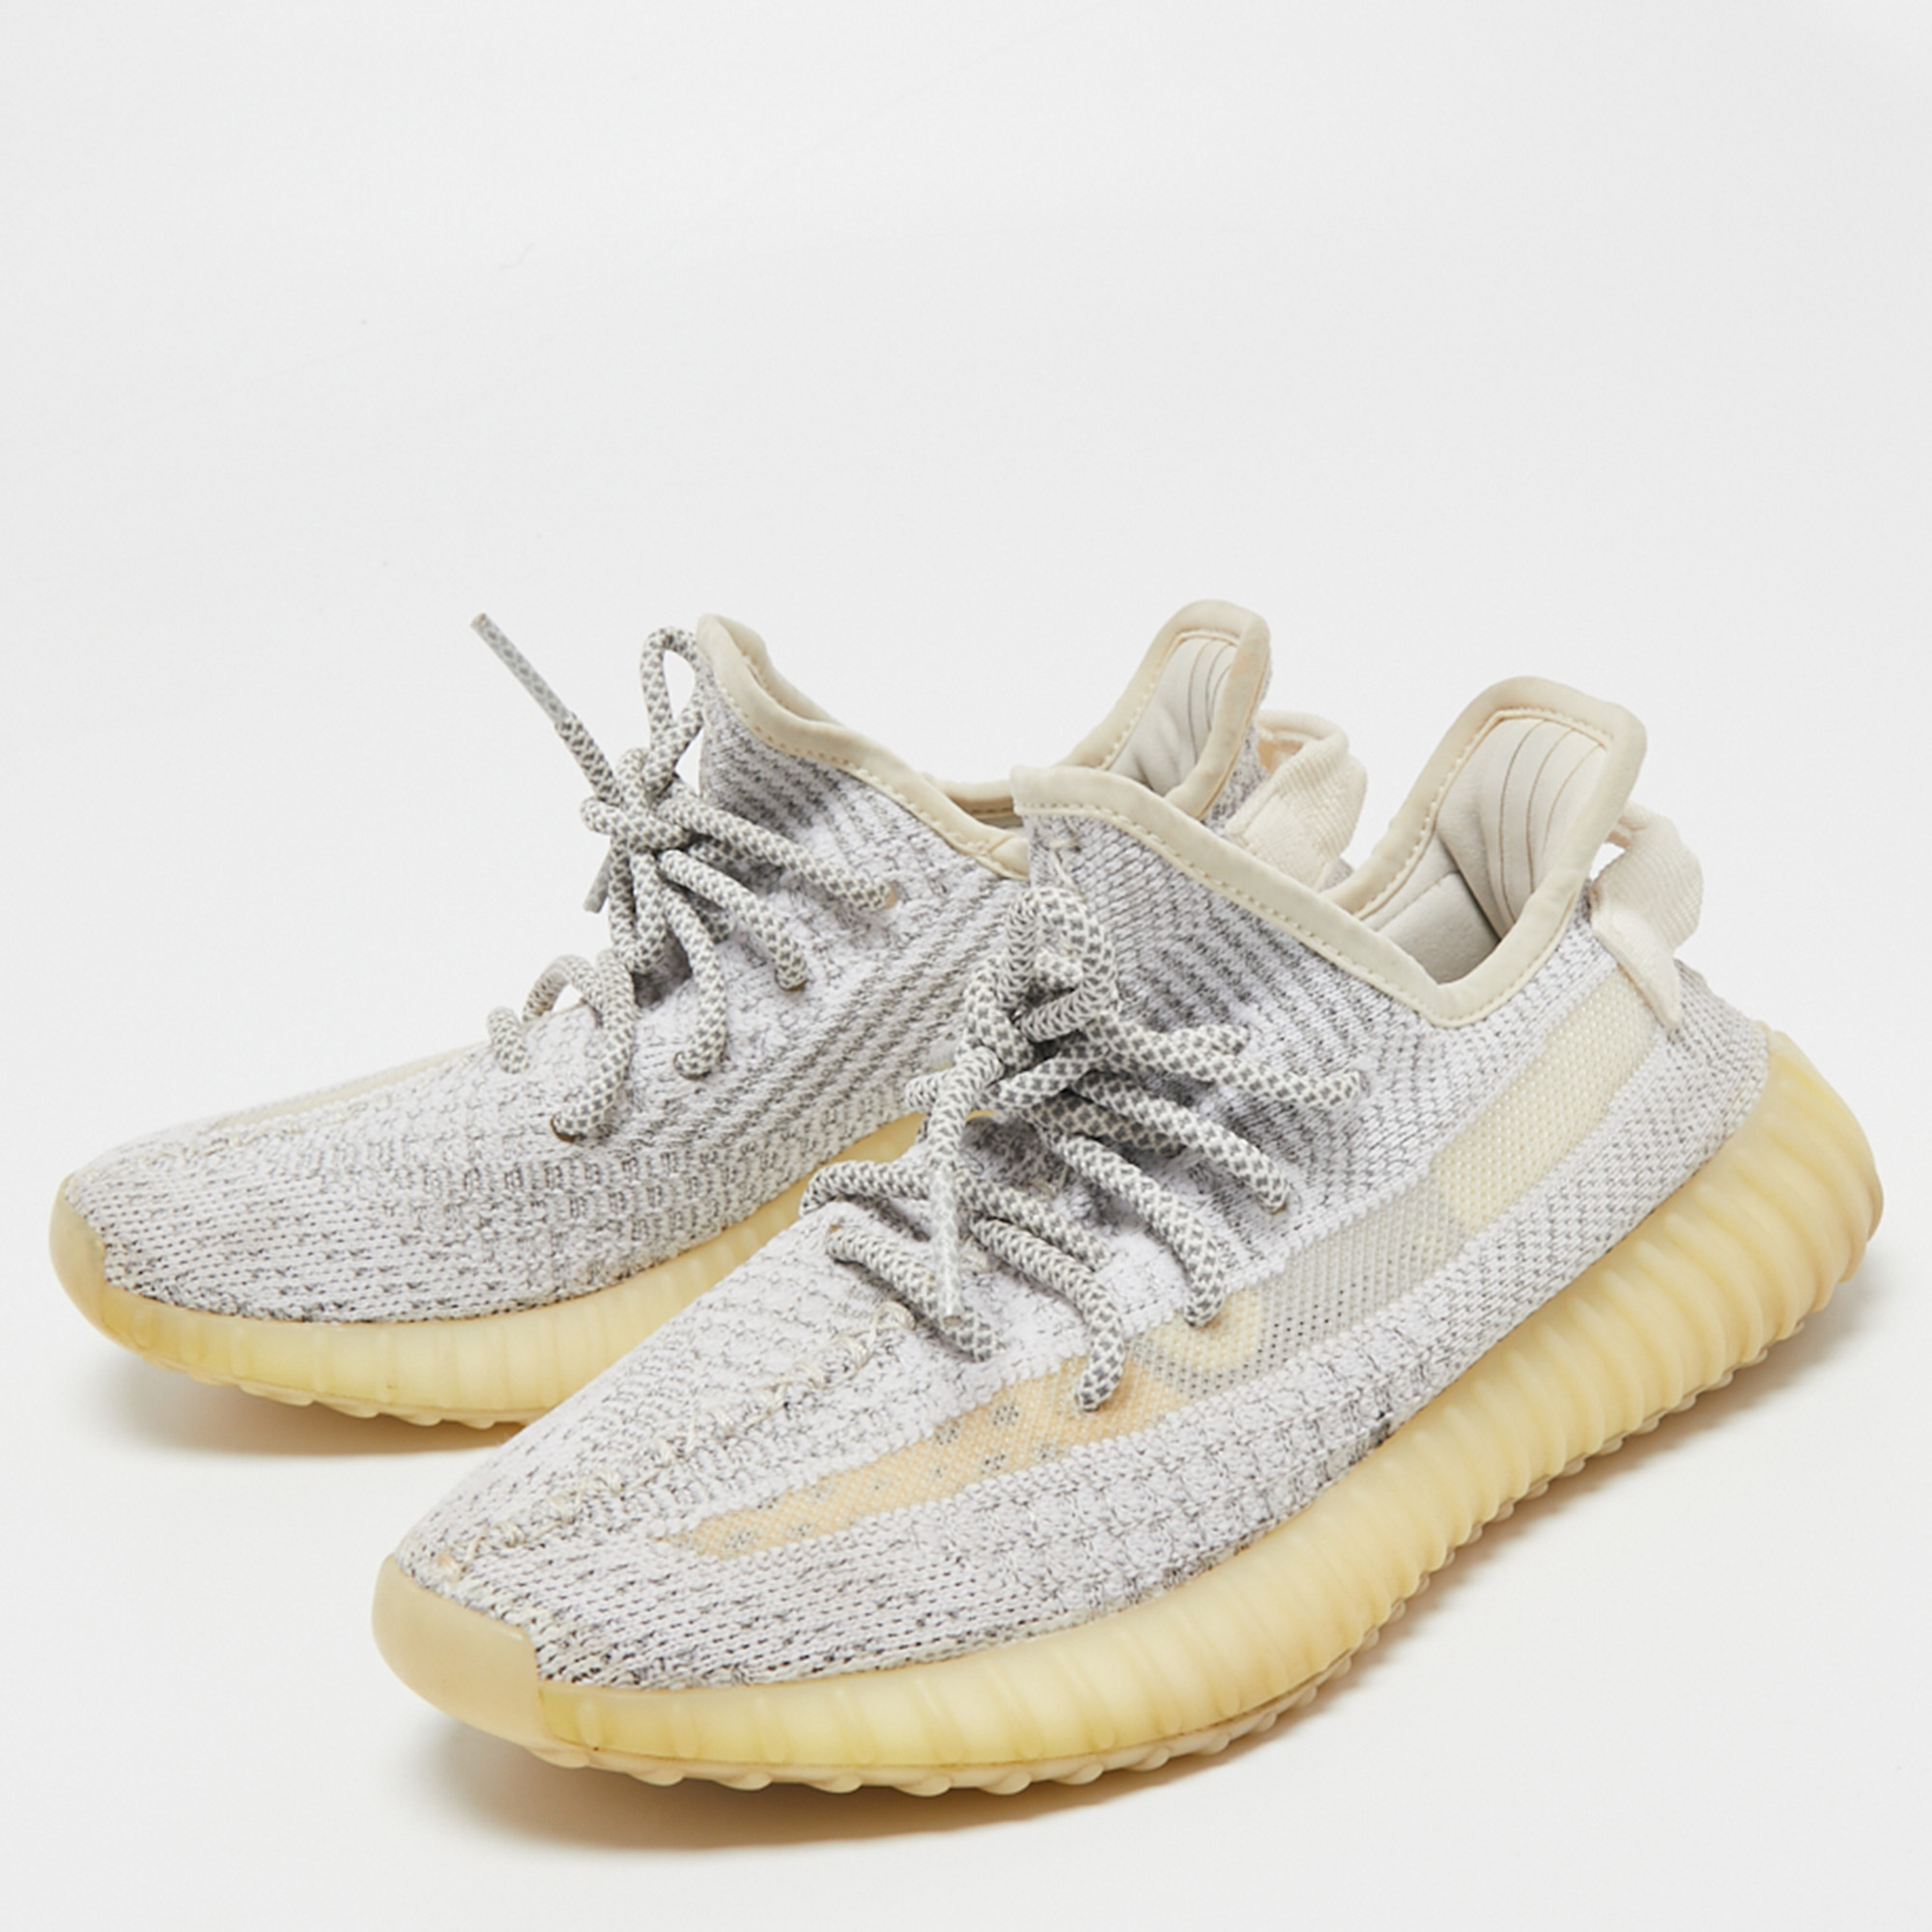 

Adidas Yeezy White Knit Fabric Boost 350 V2 Cloud (Non-Reflective) Sneakers Size 38 2/3, Grey